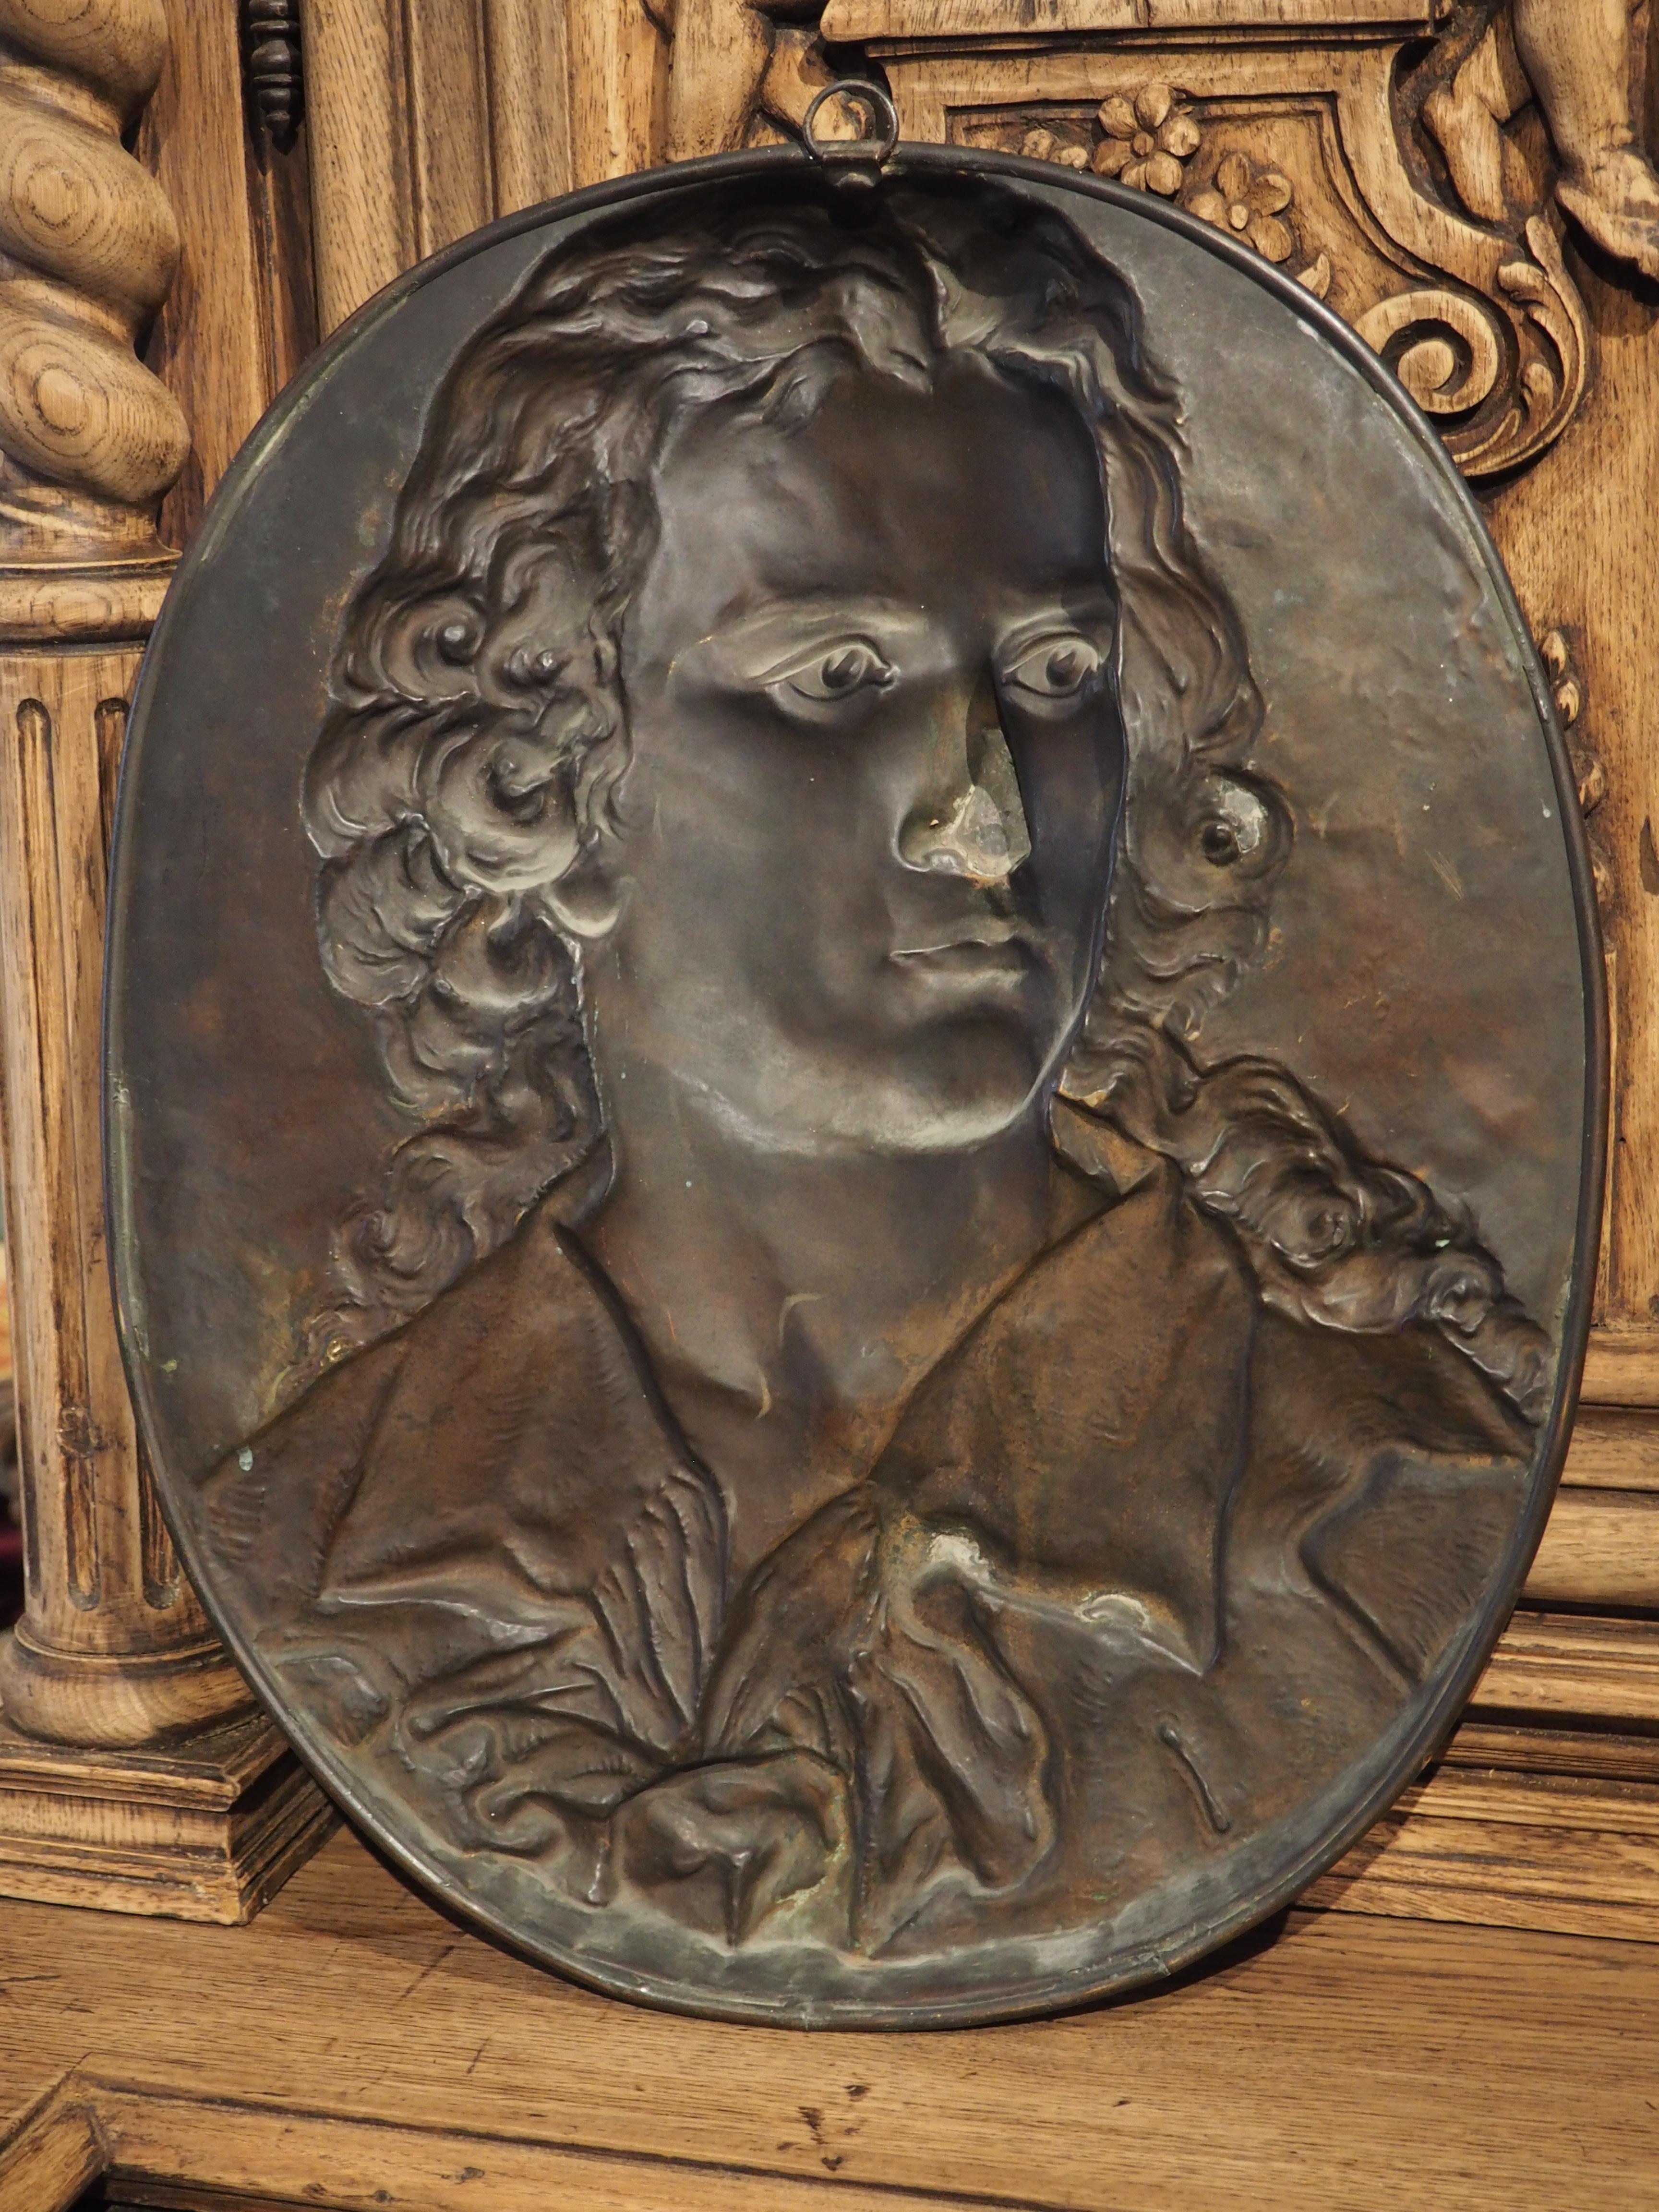 Using the ancient metalworking technique known as repousse, this copper bas relief plaque of a young nobleman was hand-chiseled by a French artist in the 1800’s. Repousse requires the metal to be “punched” from the backside, meaning that the image